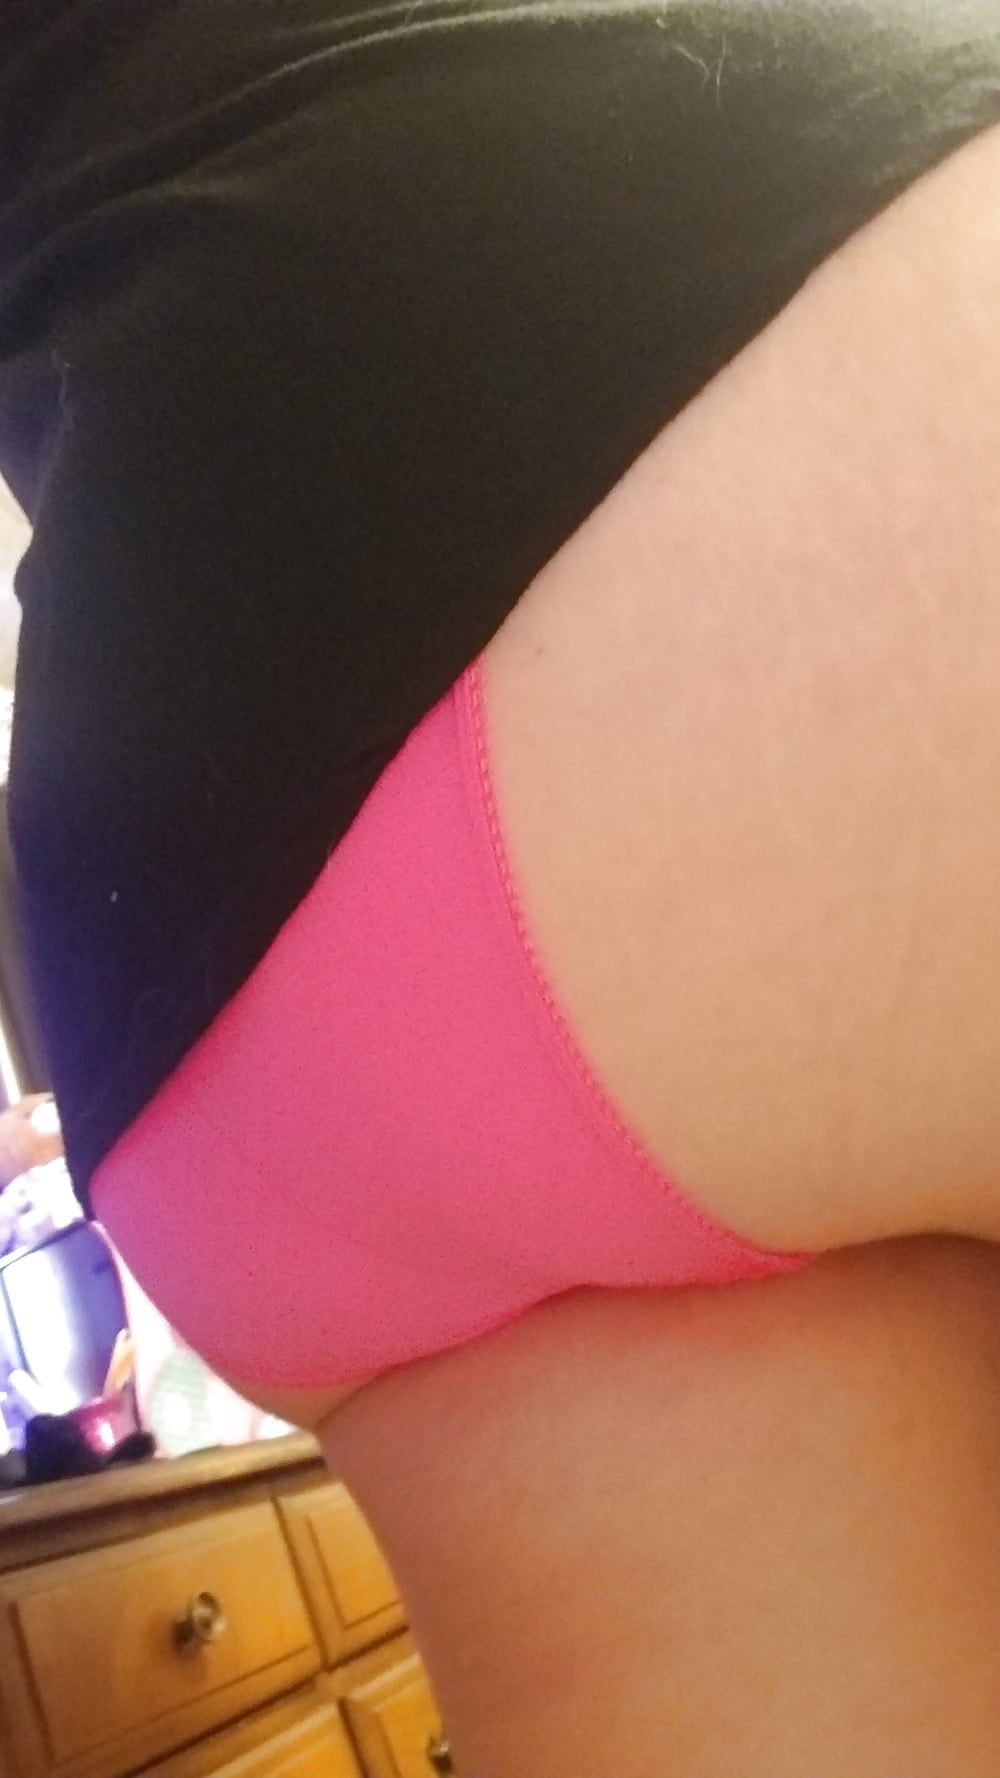 Plugged for the night. Hot pink and black panties & bra milf #15